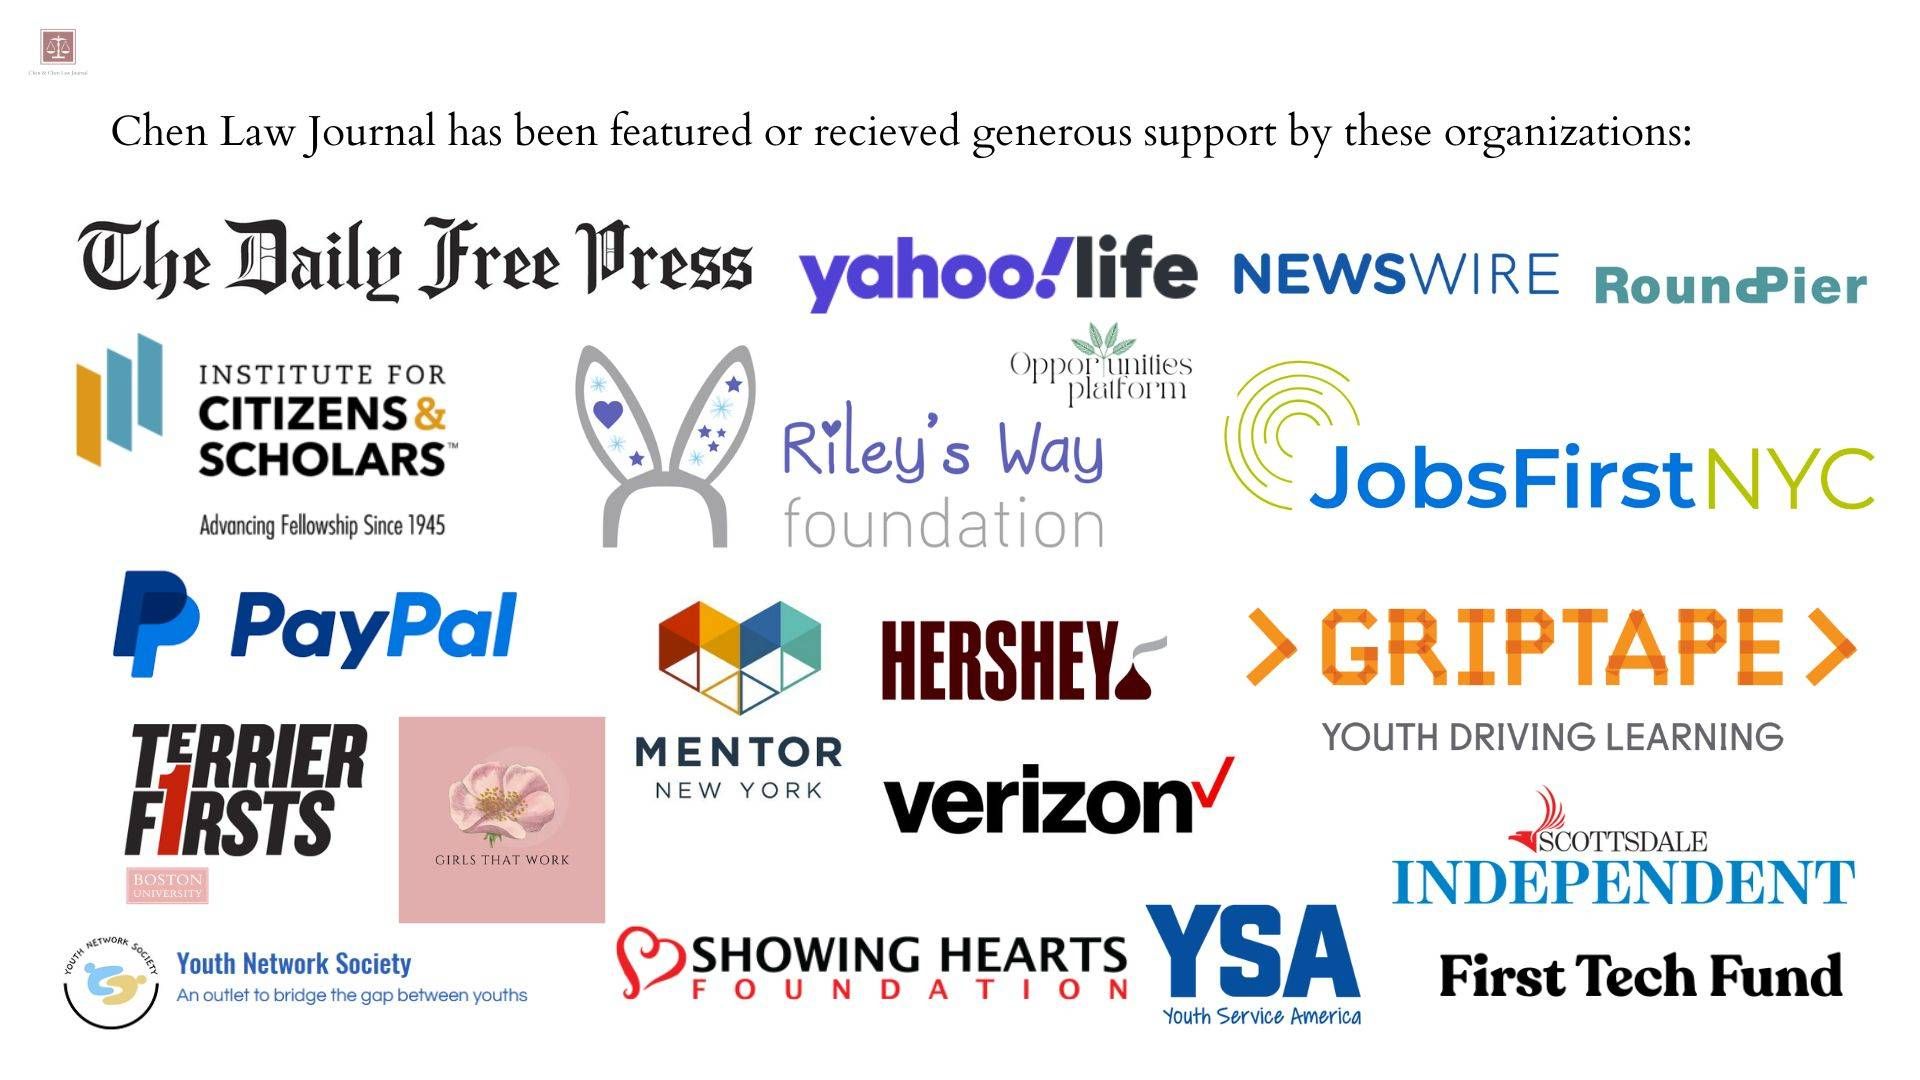 We have received generous support and/or donations from: NYT’s Daily Free Press, YahooLife, GripTape, Riley’s Way Foundation, Institute for Citizens and Scholars, Scottsdale Independent, Showing Hearts Foundation, Boston University’s Terriers First, Mentor New York, PayPal! 